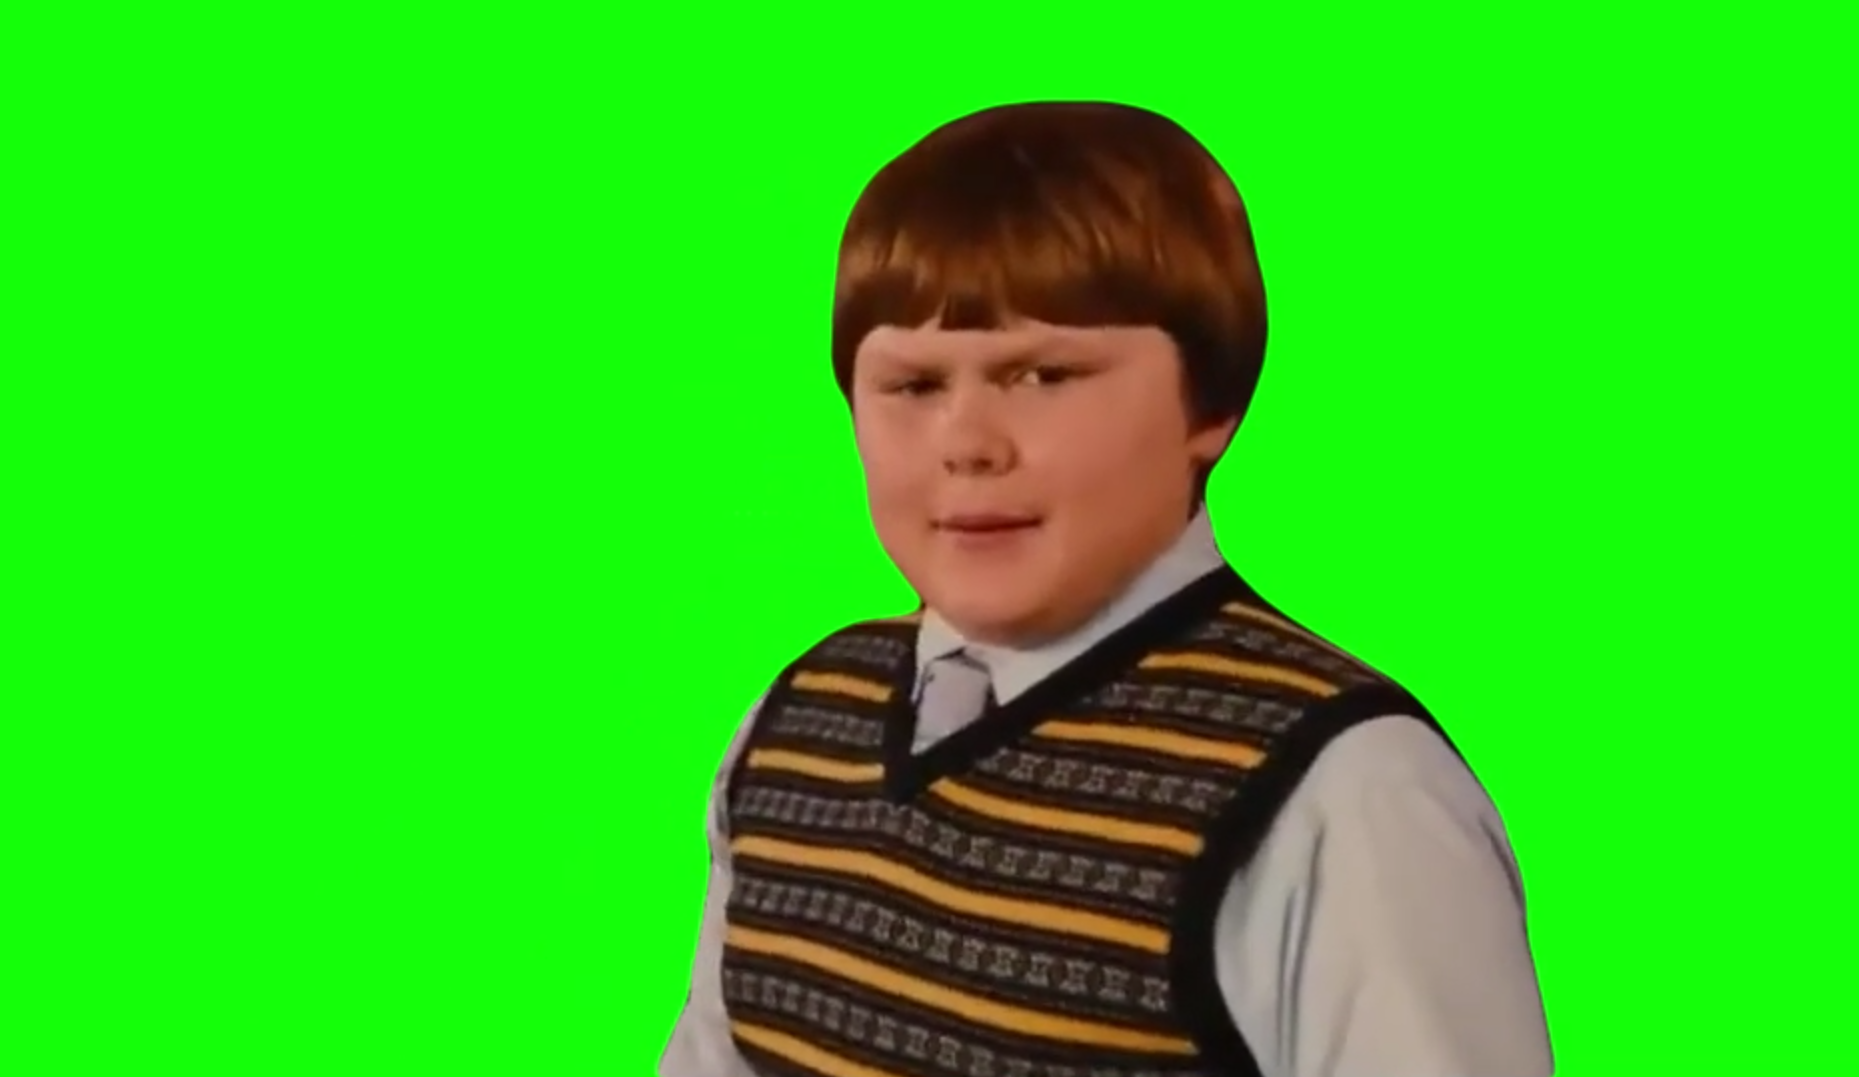 Rowley waving and looking down meme - Diary of a Wimpy Kid (Green Screen)